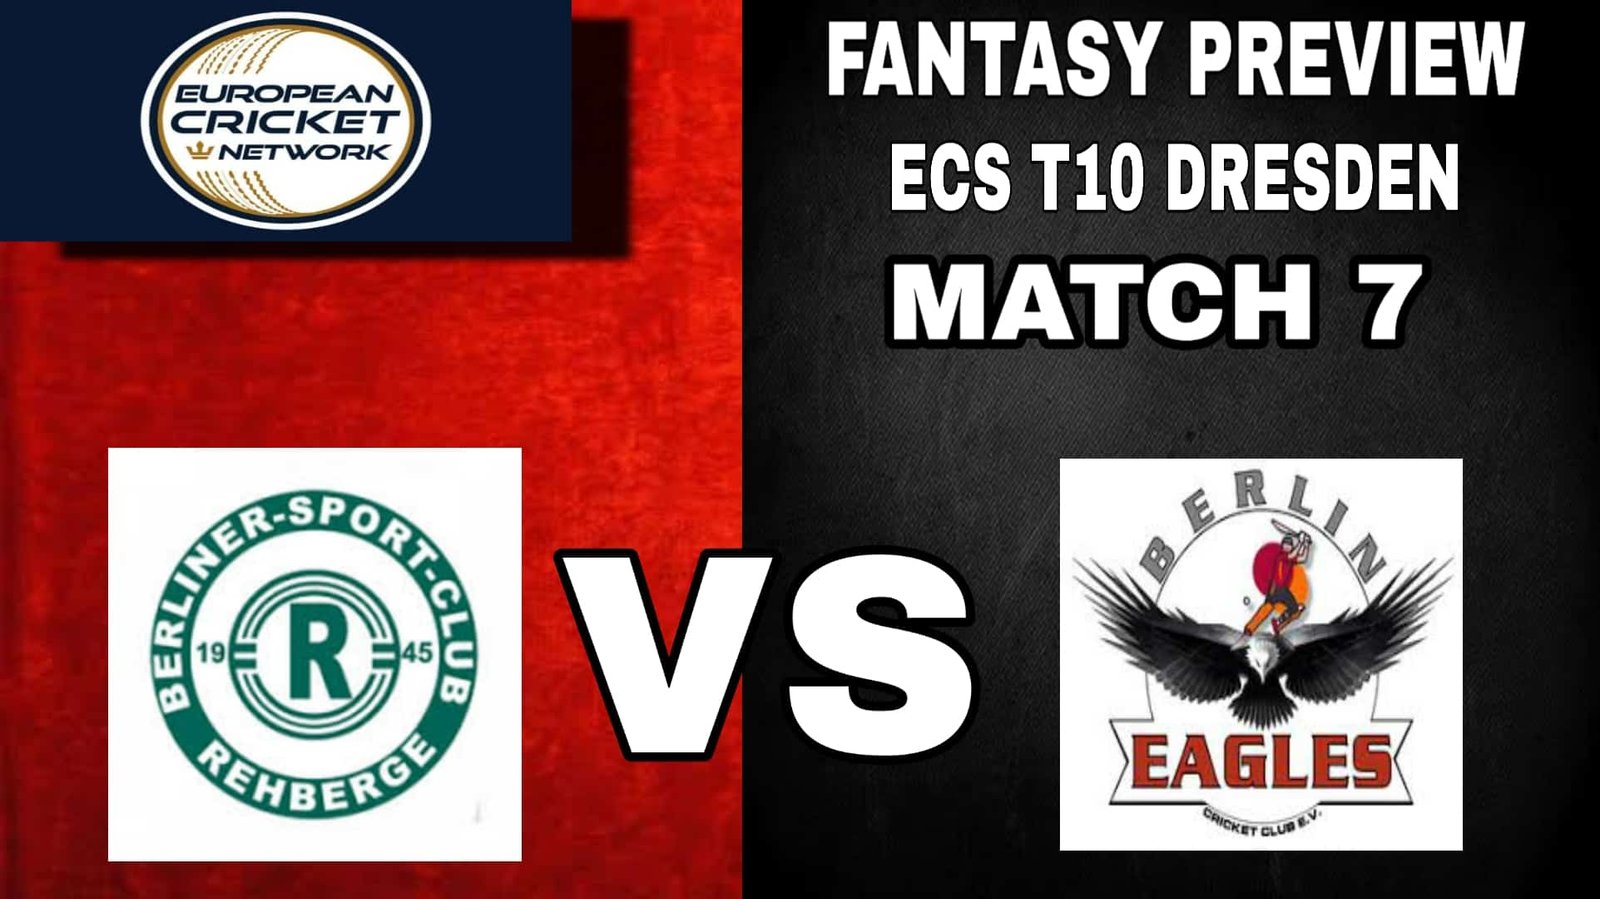 BSCR vs BECC | Match 7, ECS T10 Dresden | Dream11 Today Match Prediction and Players Records